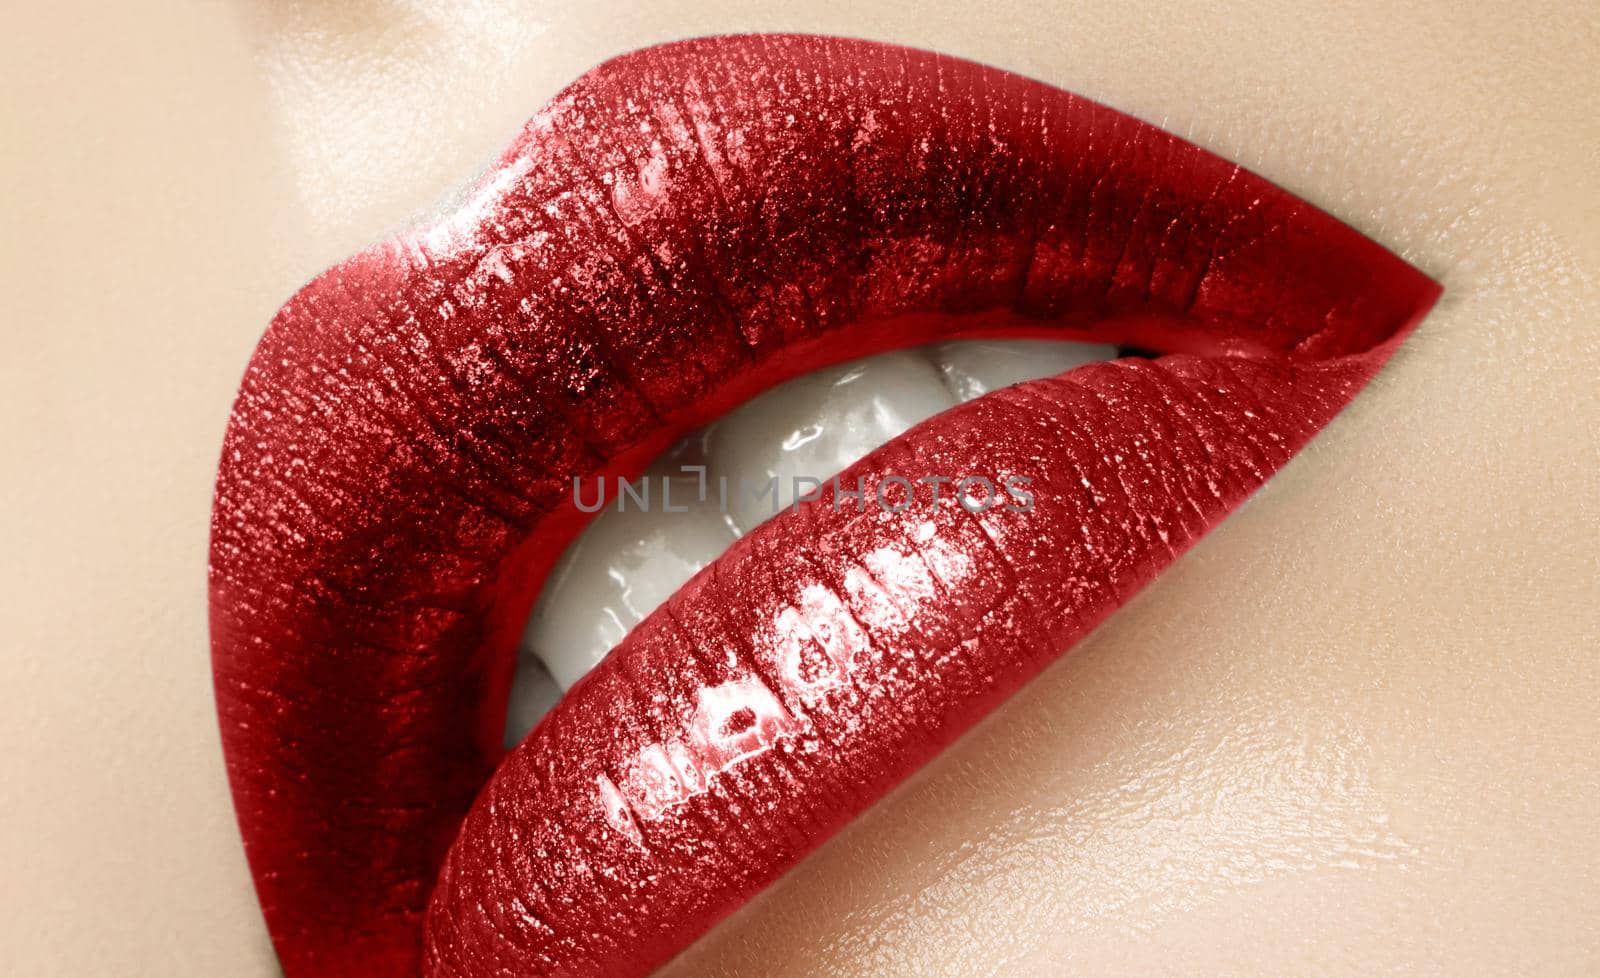 Beautiful Woman Lips with Fashion Red Lipstick Makeup. Cosmetic, Fashion Make-Up Concept. Beauty Lip Visage. Passionate kiss. Female Sexy Open Mouth